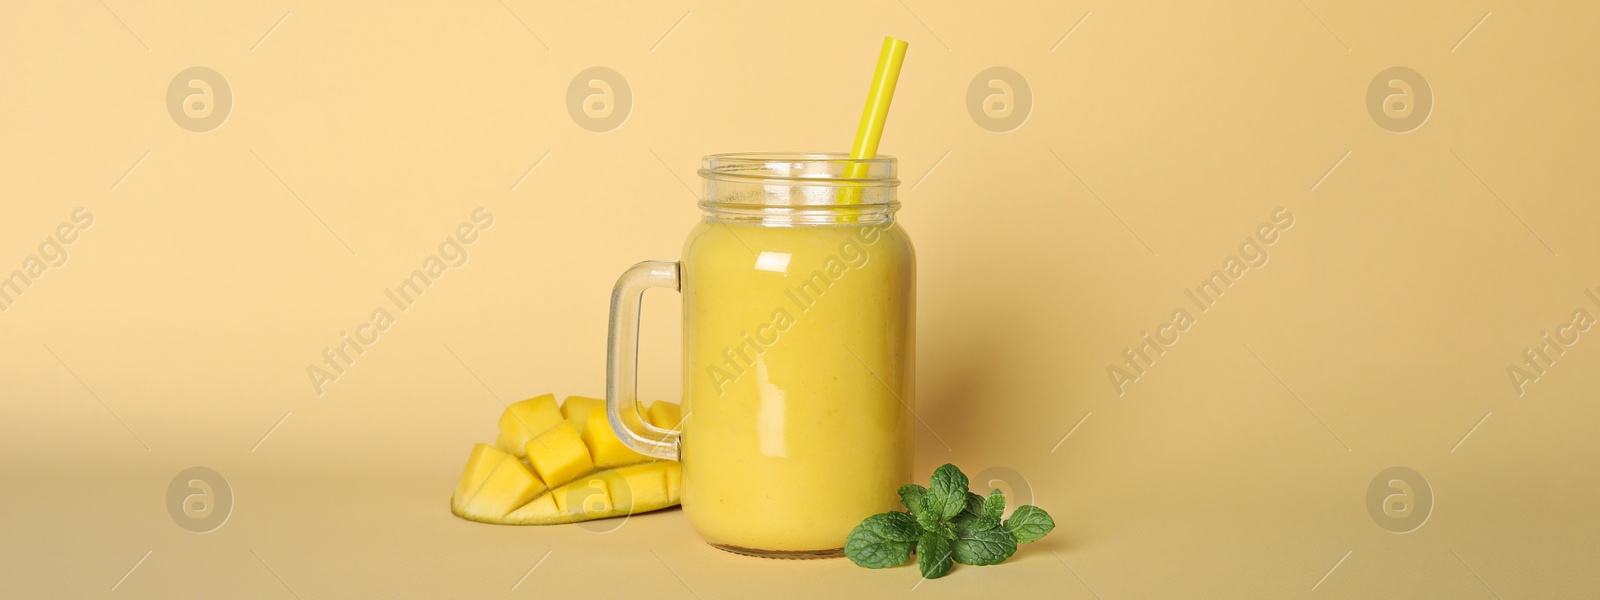 Image of Mason jar of tasty smoothie with straw, mango and mint leaves on beige background. Banner design